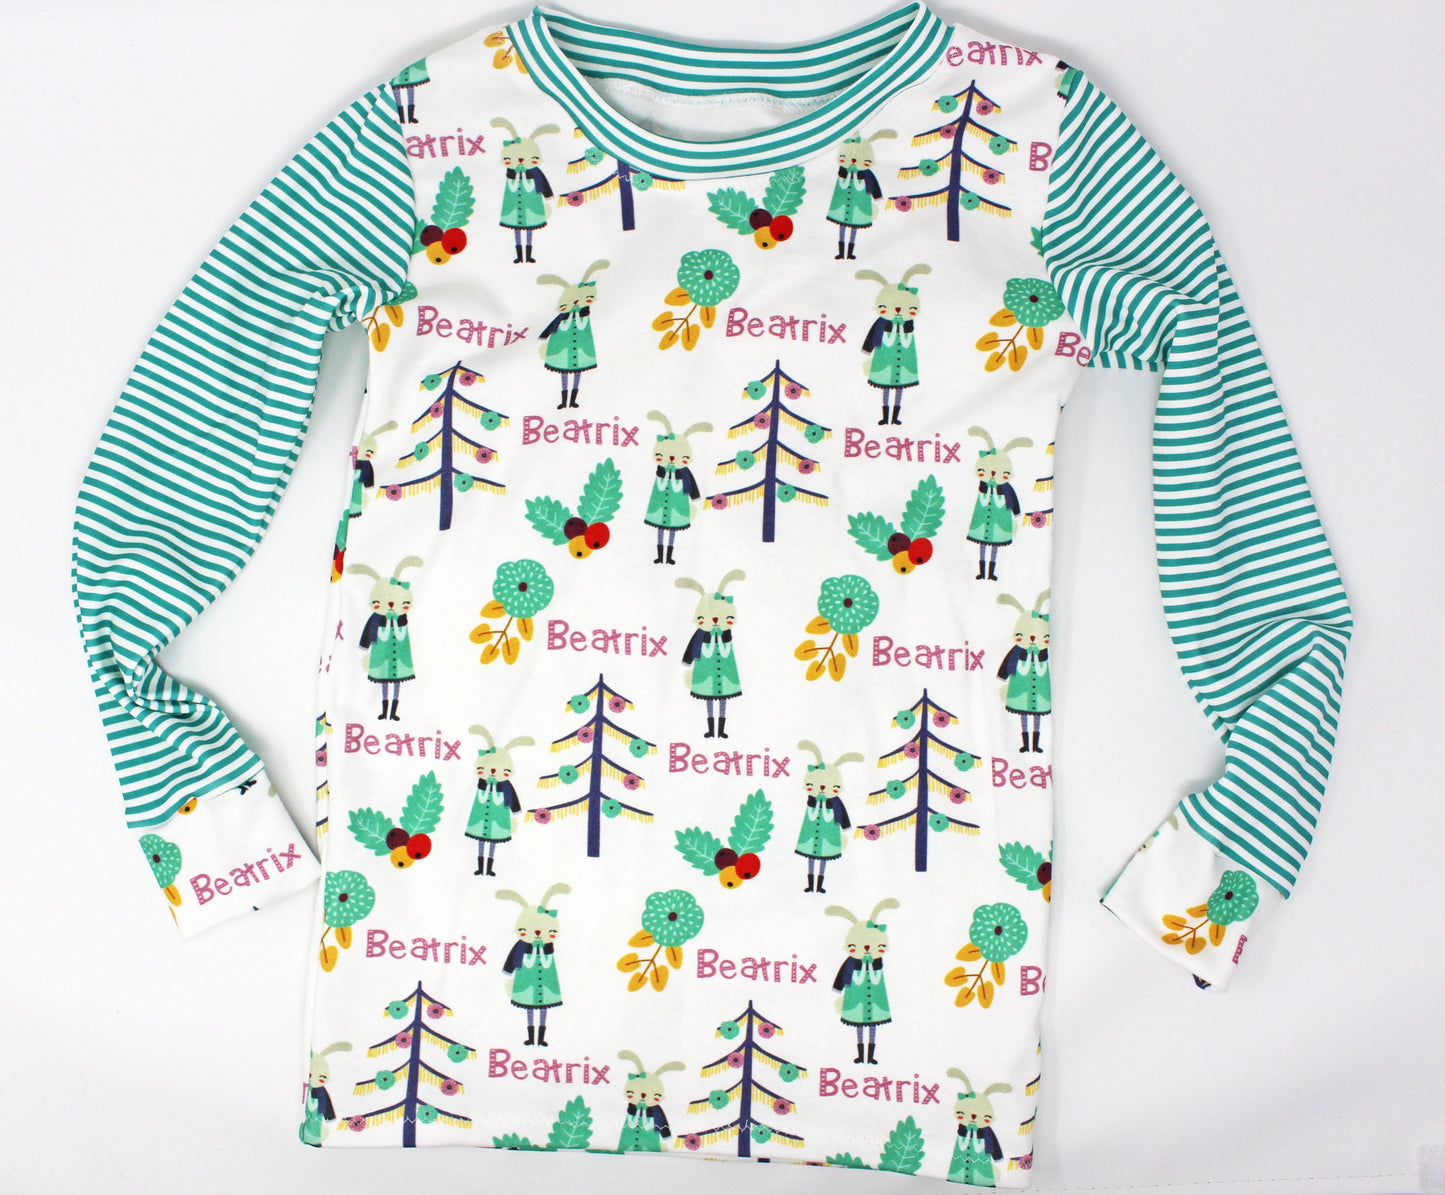 Personalized Winter Woodland Christmas Pajamas for Infants, Children, and Families with Woodland Animals